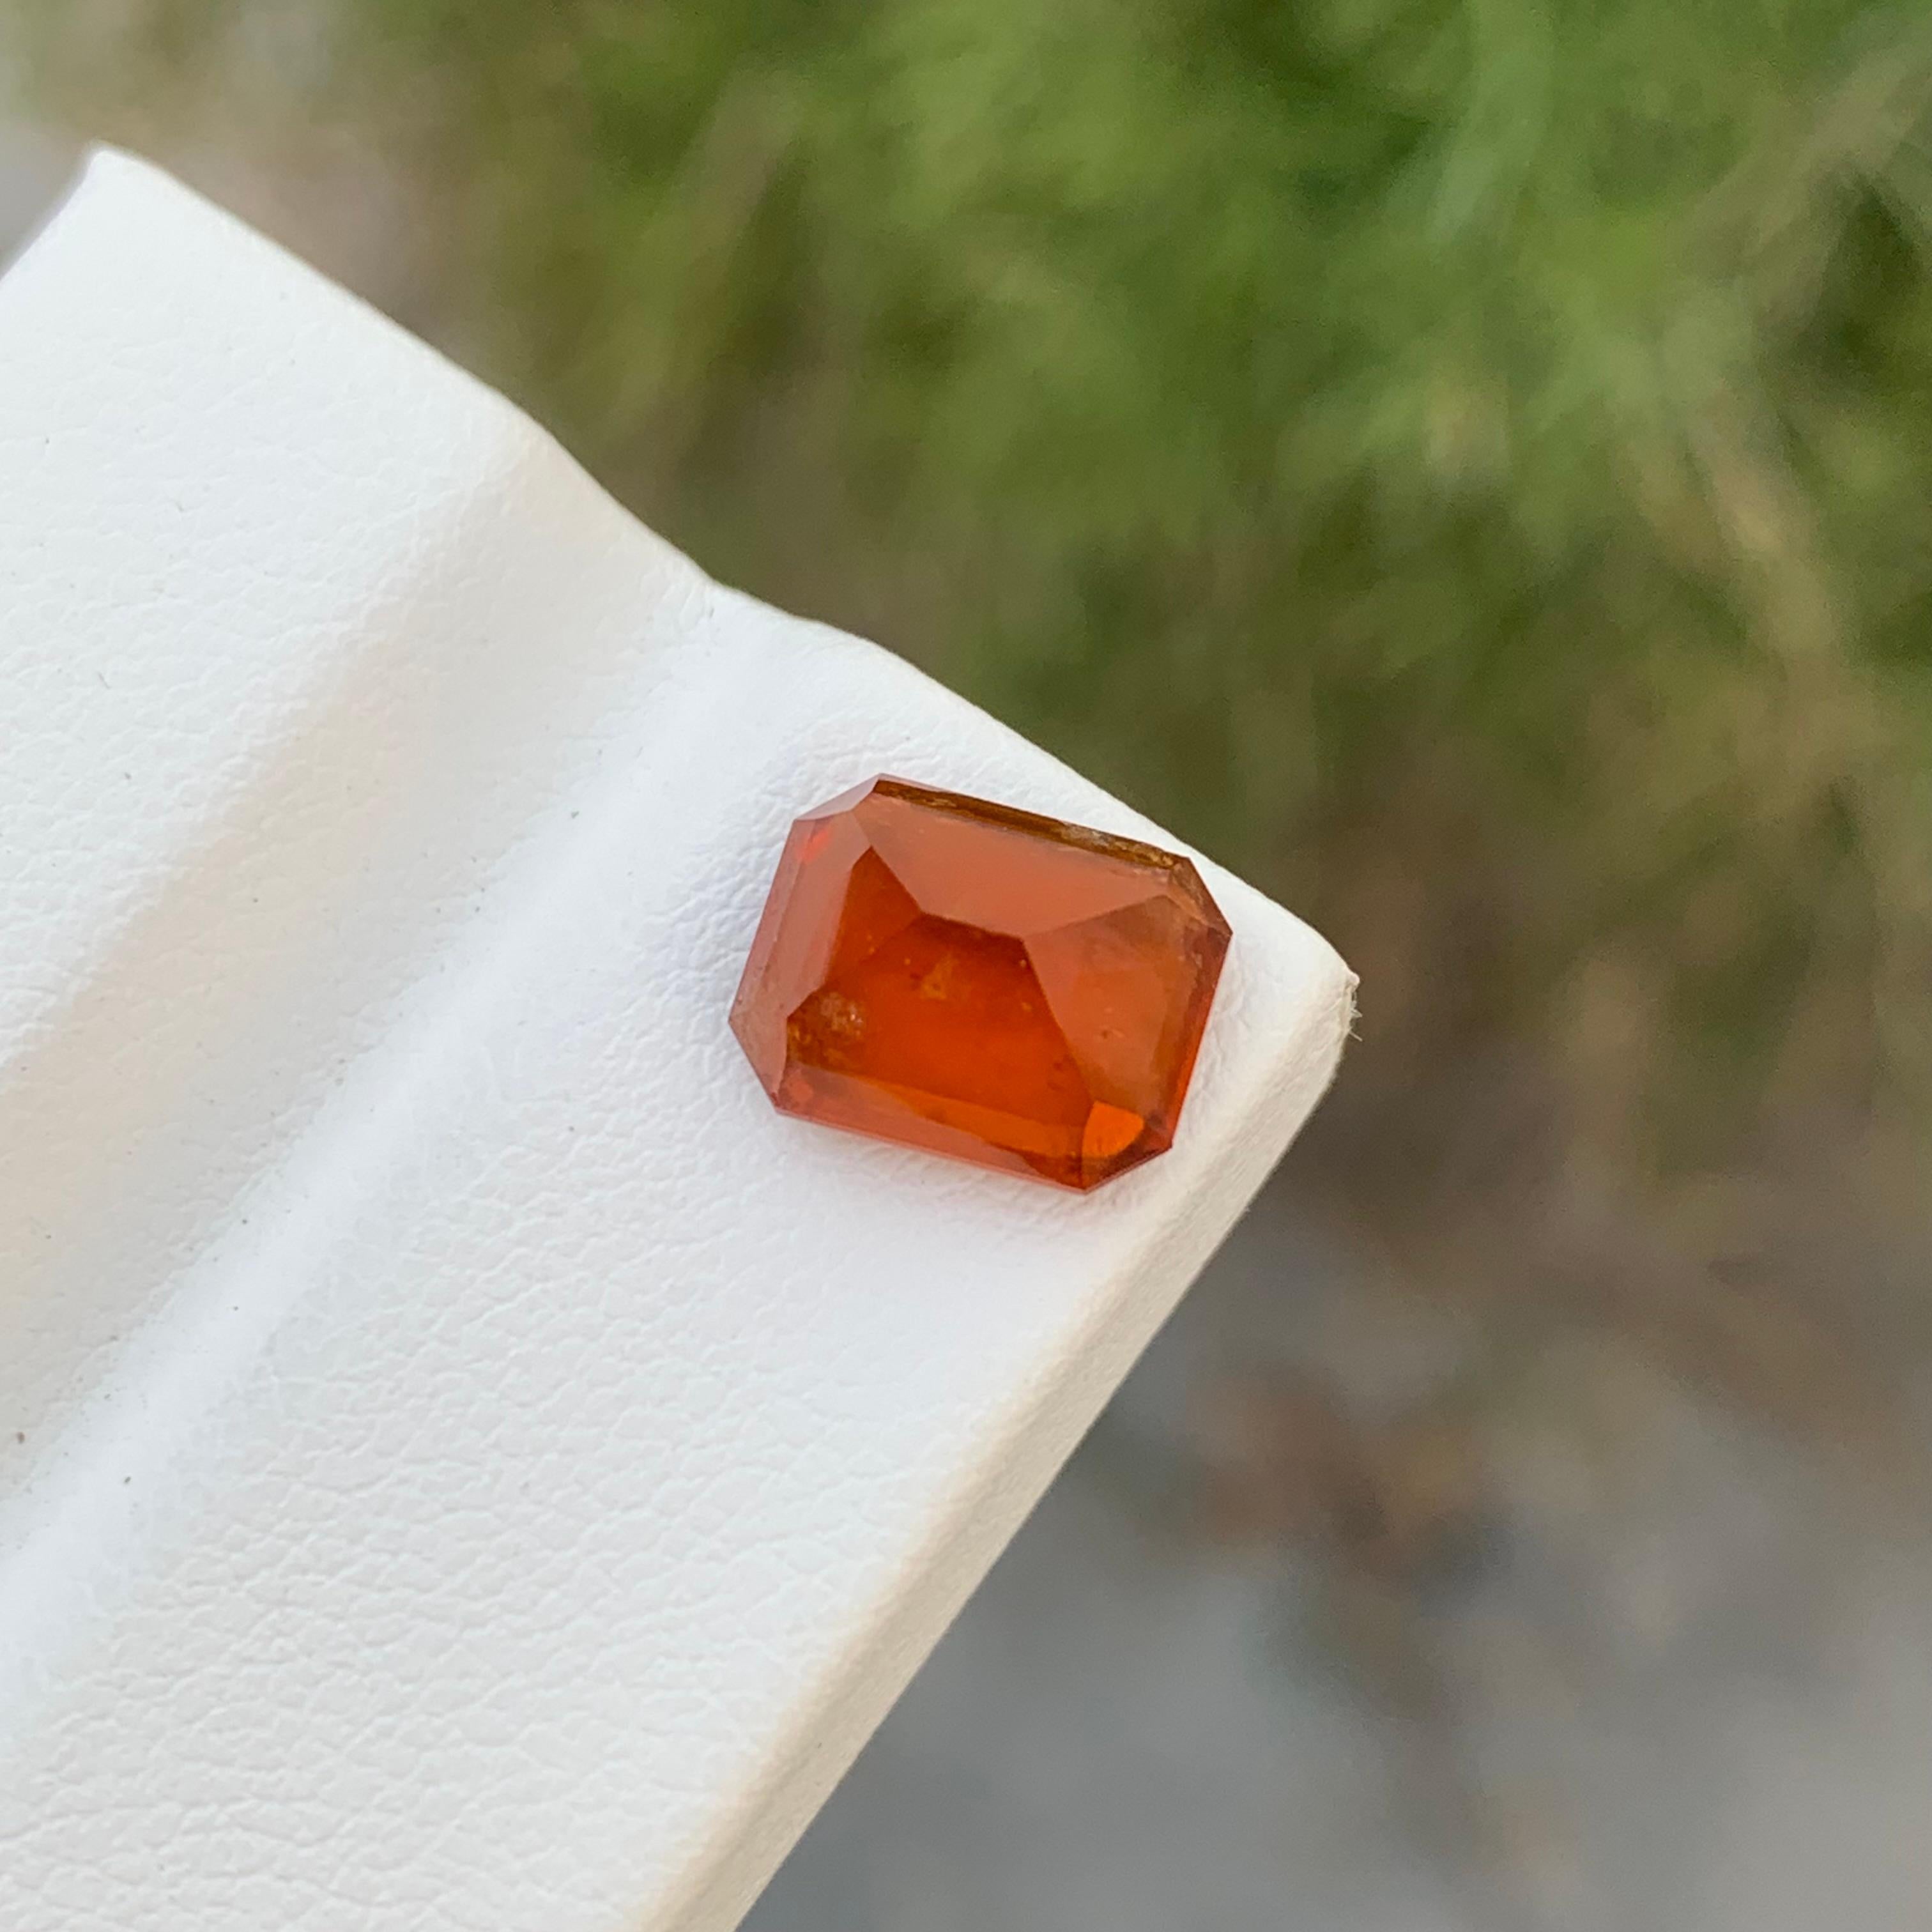 3.75 Carats Pretty Loose Hessonite Smoky Garnet Gem For Jewellery Making  For Sale 1